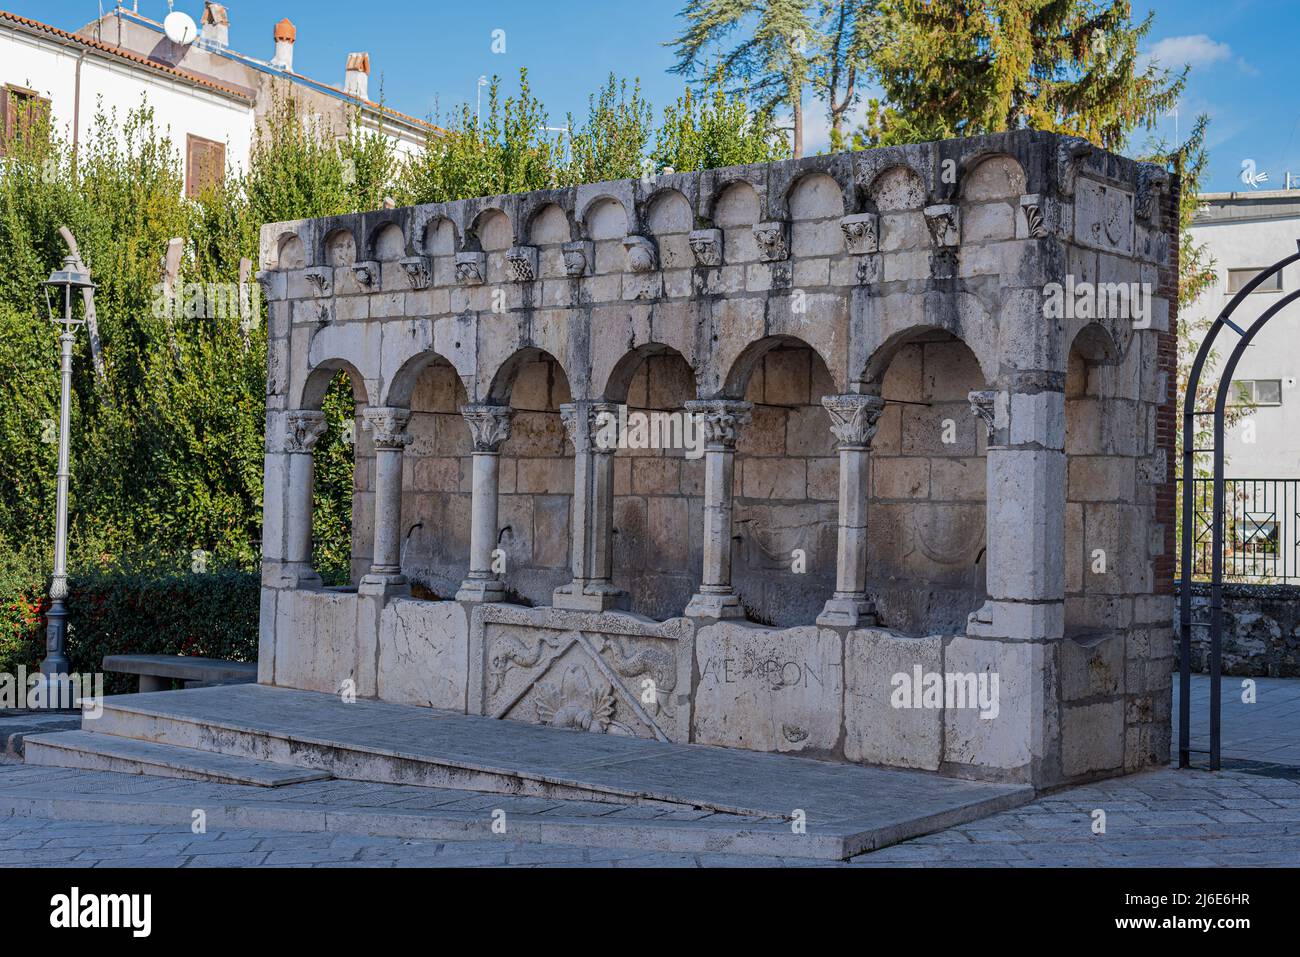 Isernia, Molise. The 'Fraternal Fountain'.Is an elegant public fountain, as well as a symbol, of the city of Isernia. Stock Photo